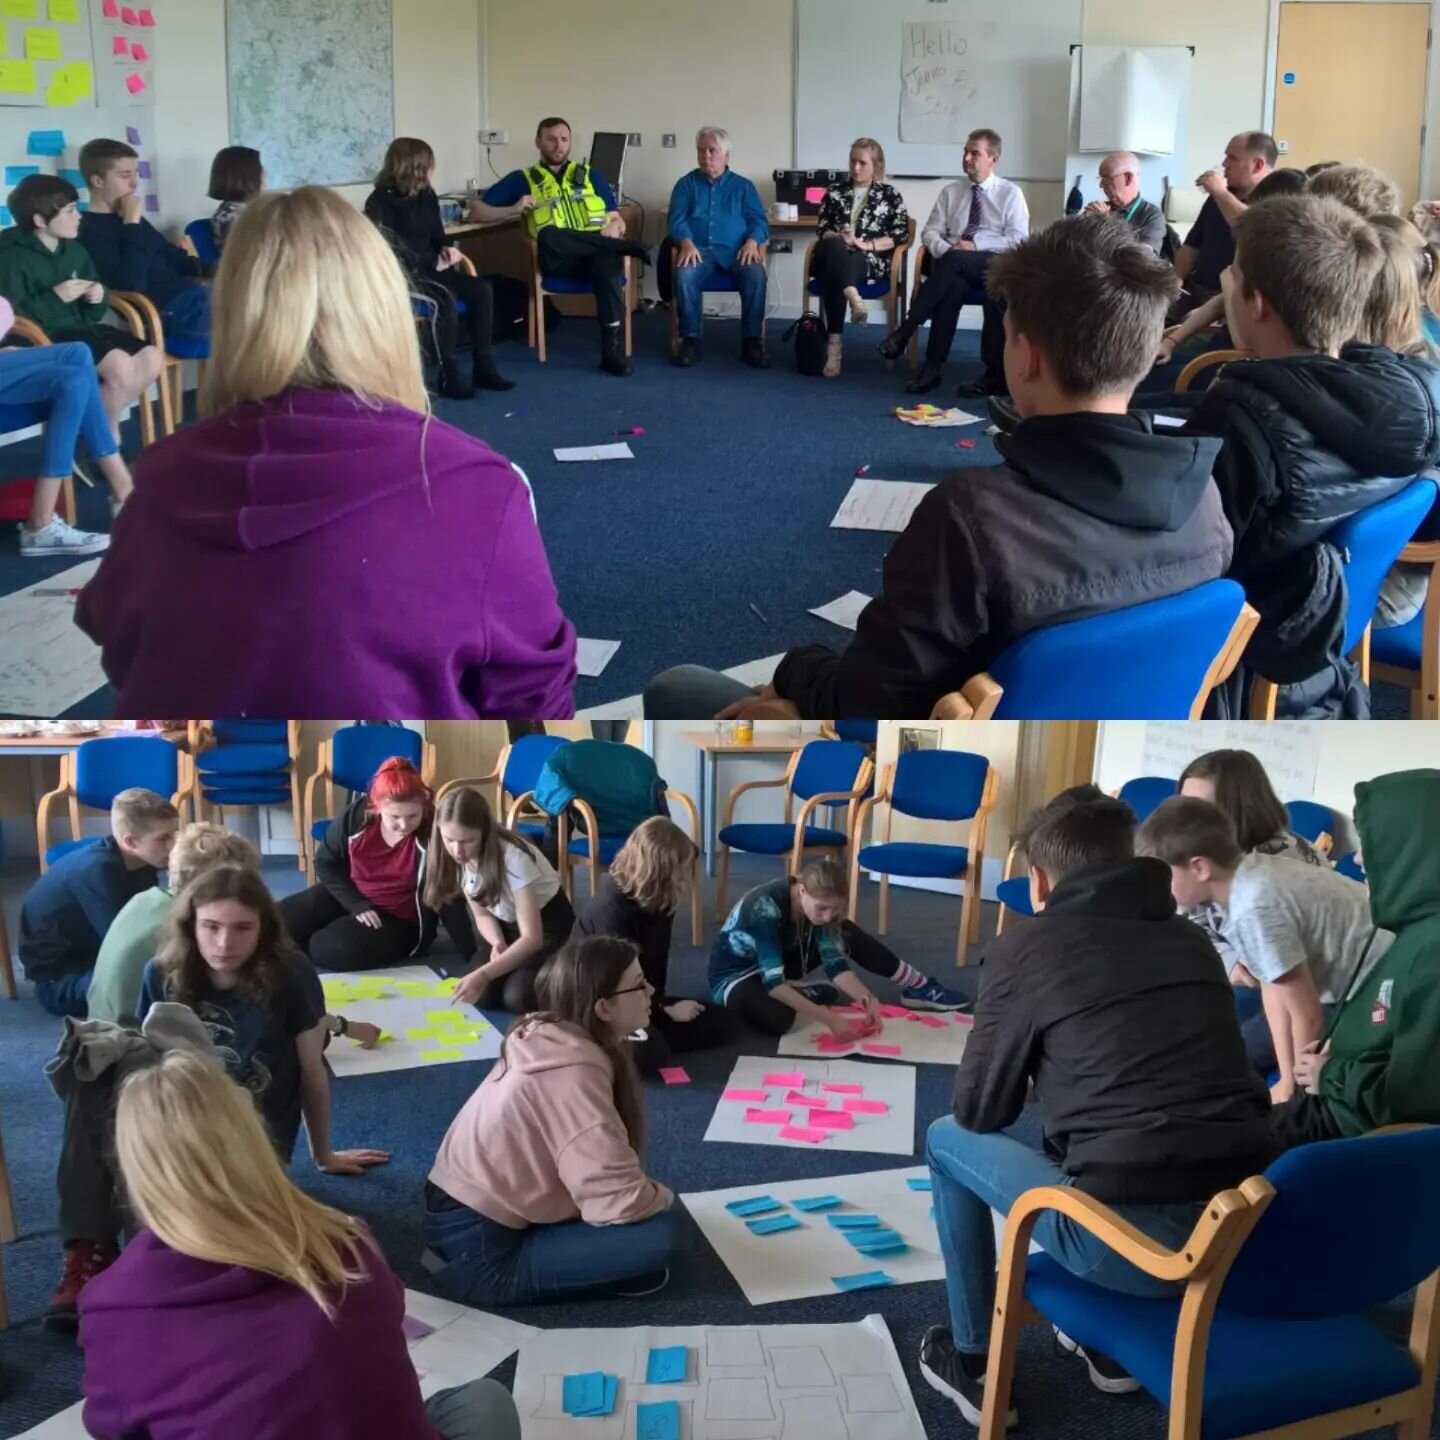 #throwbackthursday on National Youth Work Week is back to the spring of 2019. SDYC members attending their youth voice training event 📣😁🧠🗣

@steveyouthworker @sebyouthworker @strouddistrictcouncil 

#strouddistrictyouthcouncil #stroudyouthvoice #